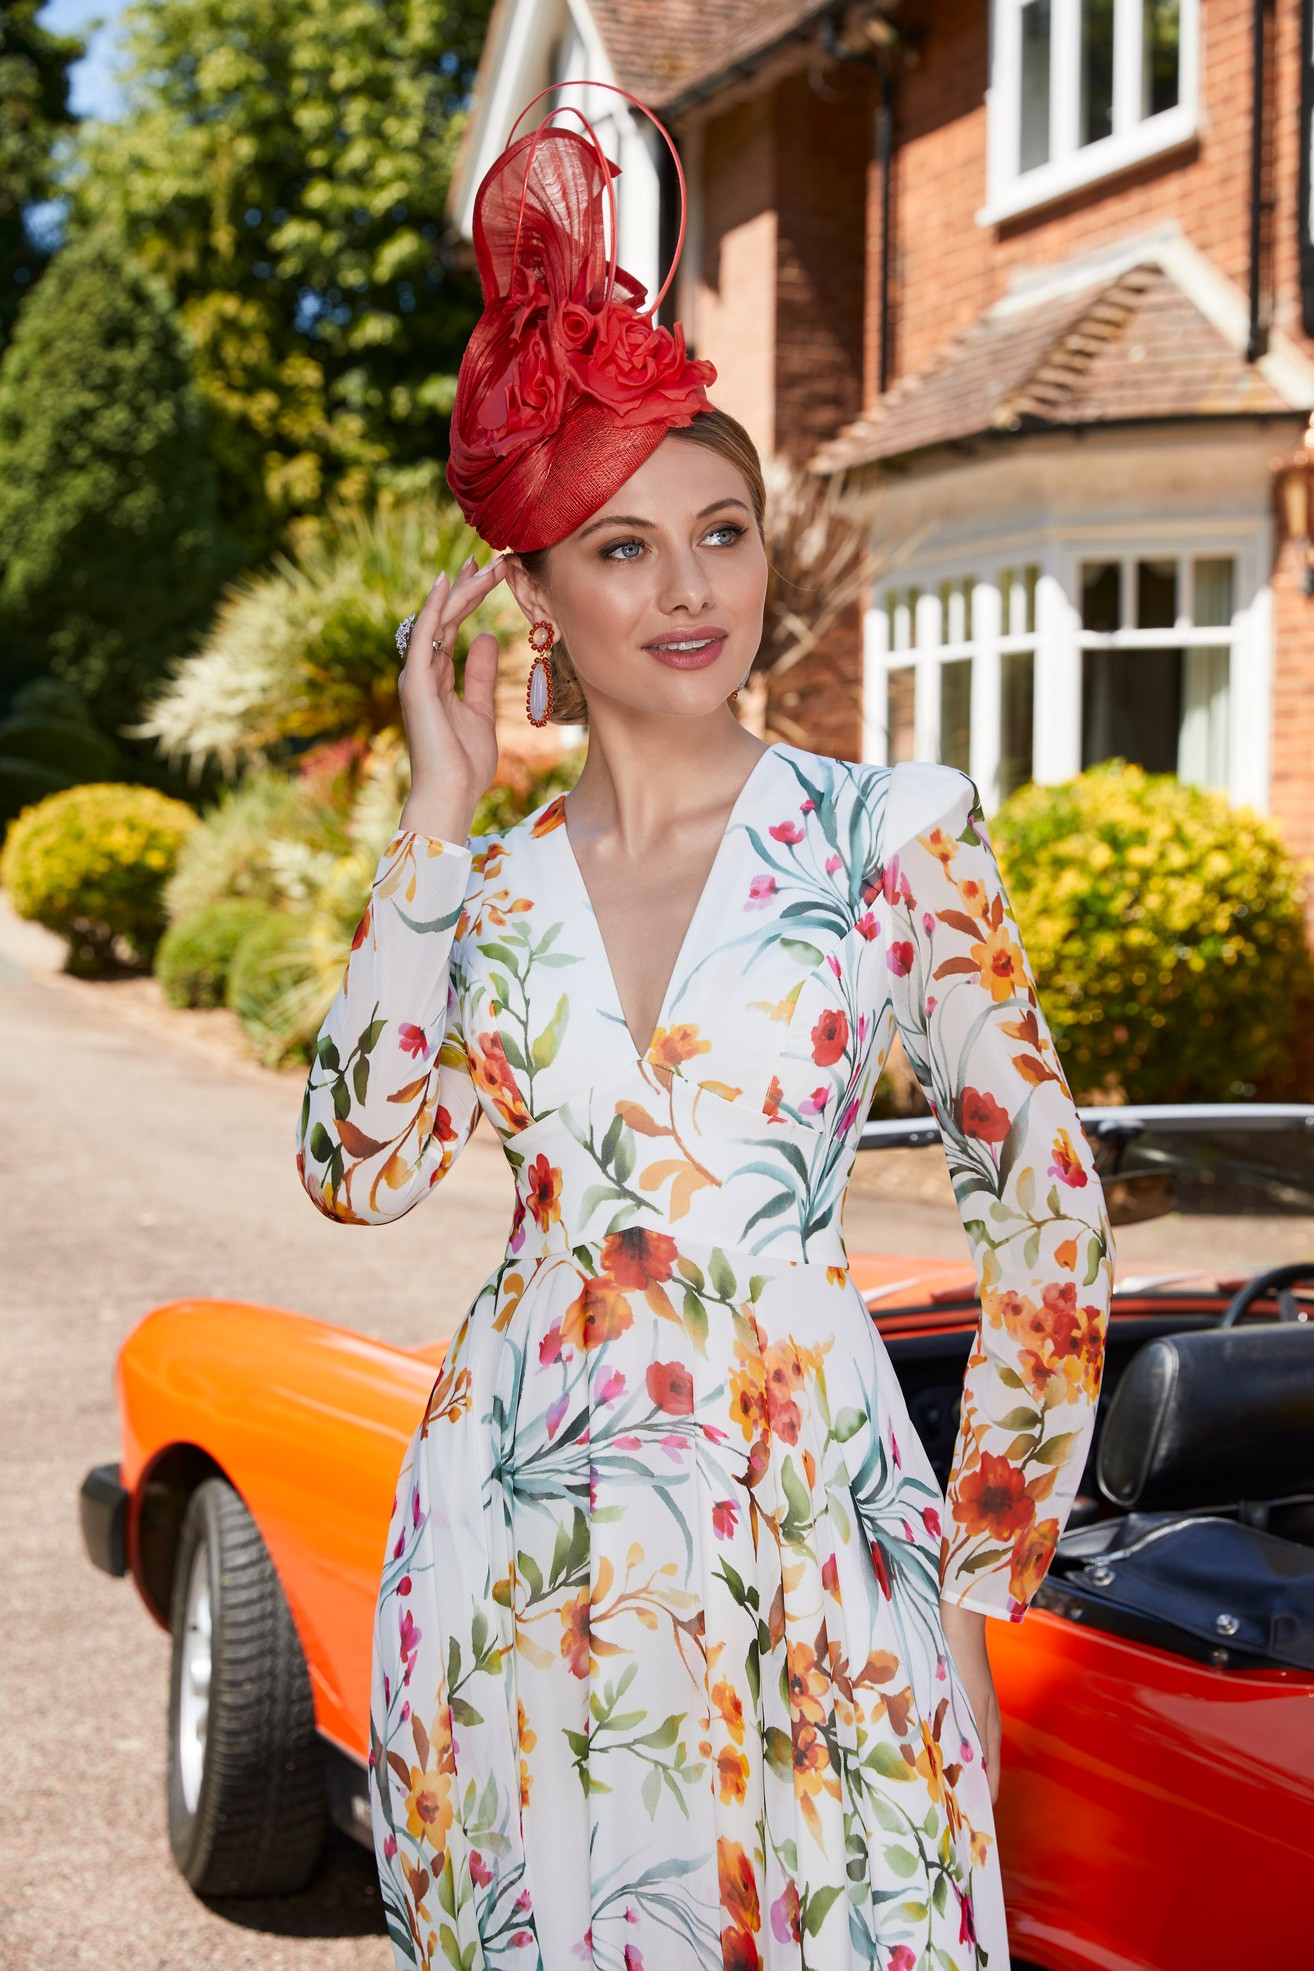 Woman standing next to vintage orange car in front of house wearing bold floral print long sleeve special occasion dress and fascinator head accessory